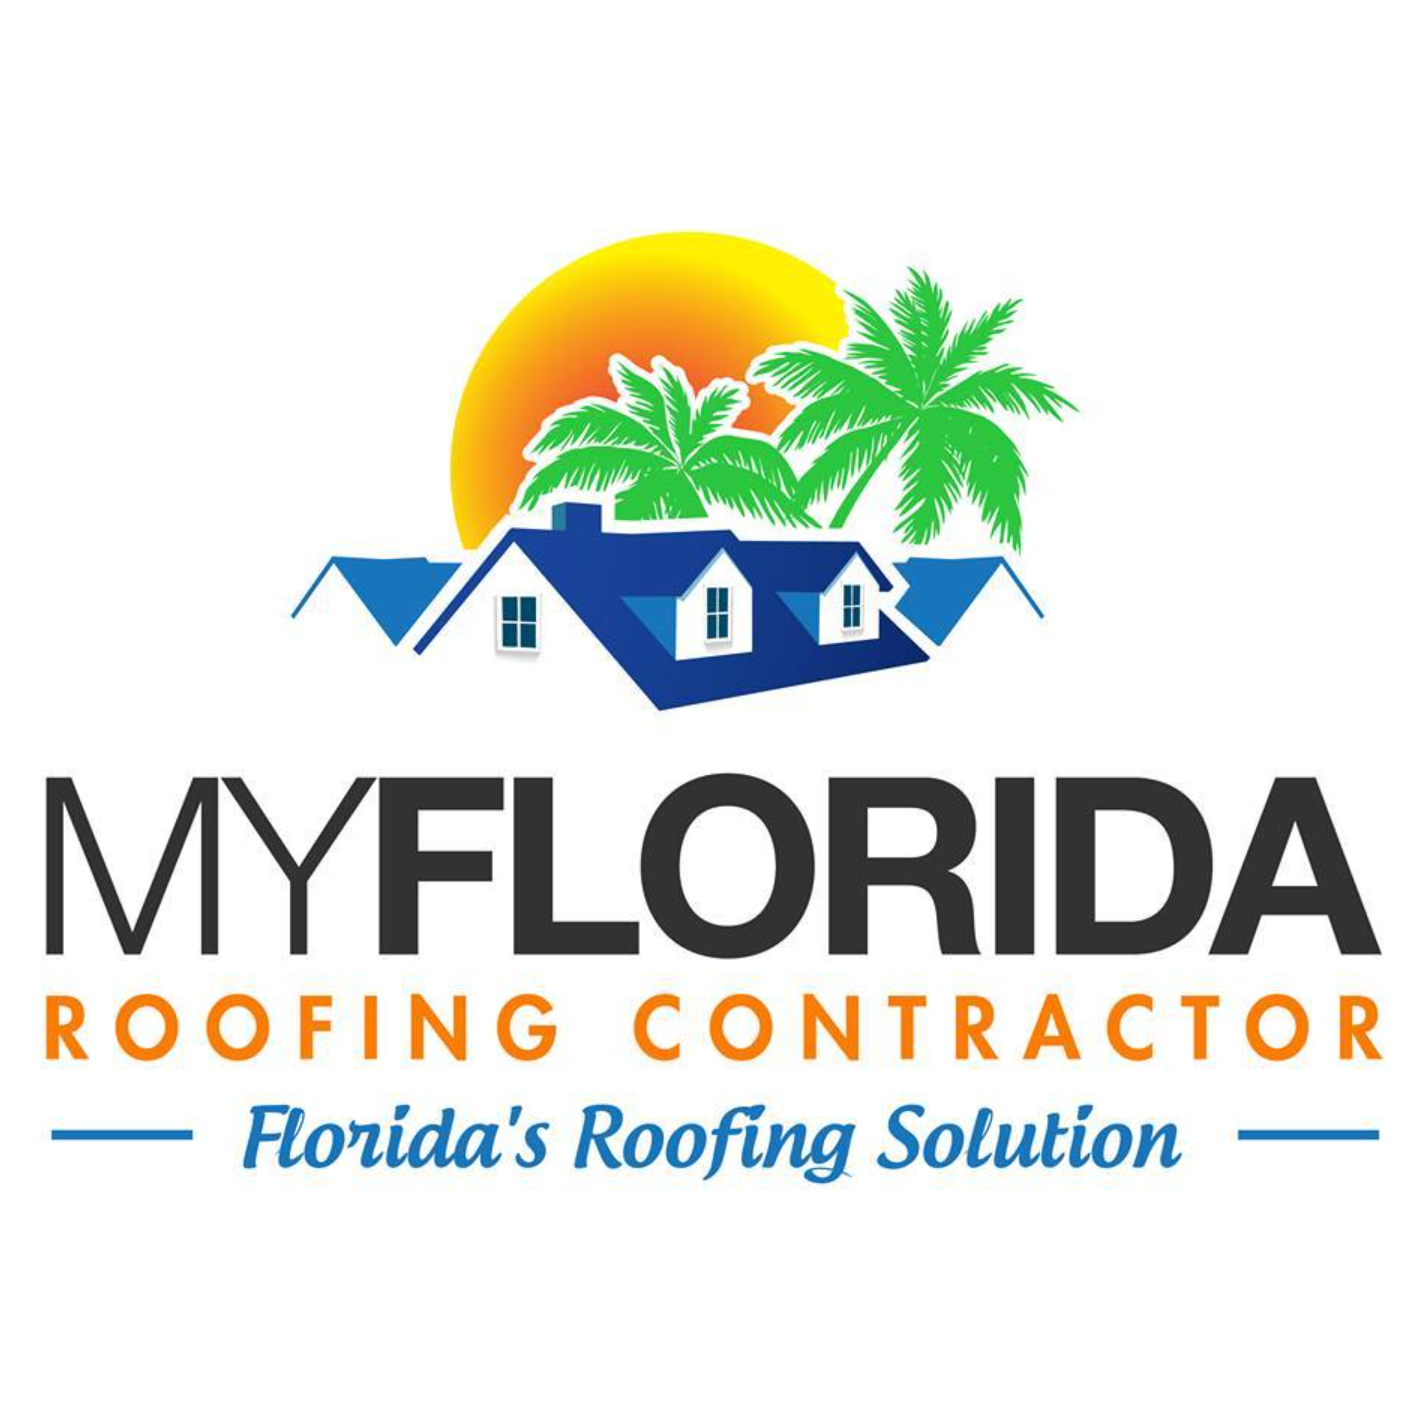 My Florida Roofing Contractor Logo